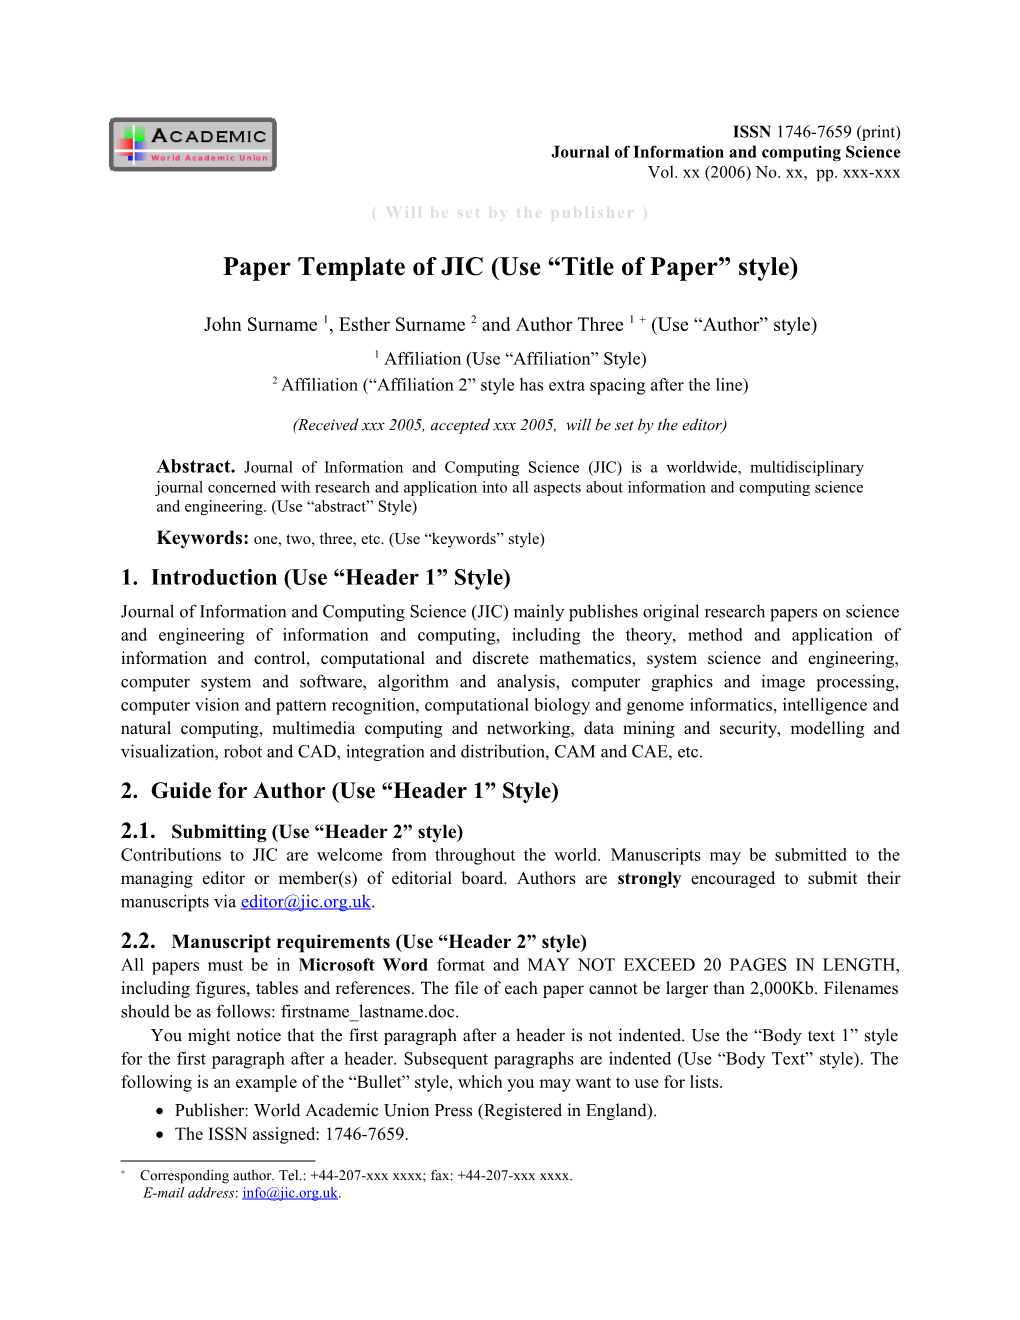 Paper Template of JIC (Use Title of Paper Style)